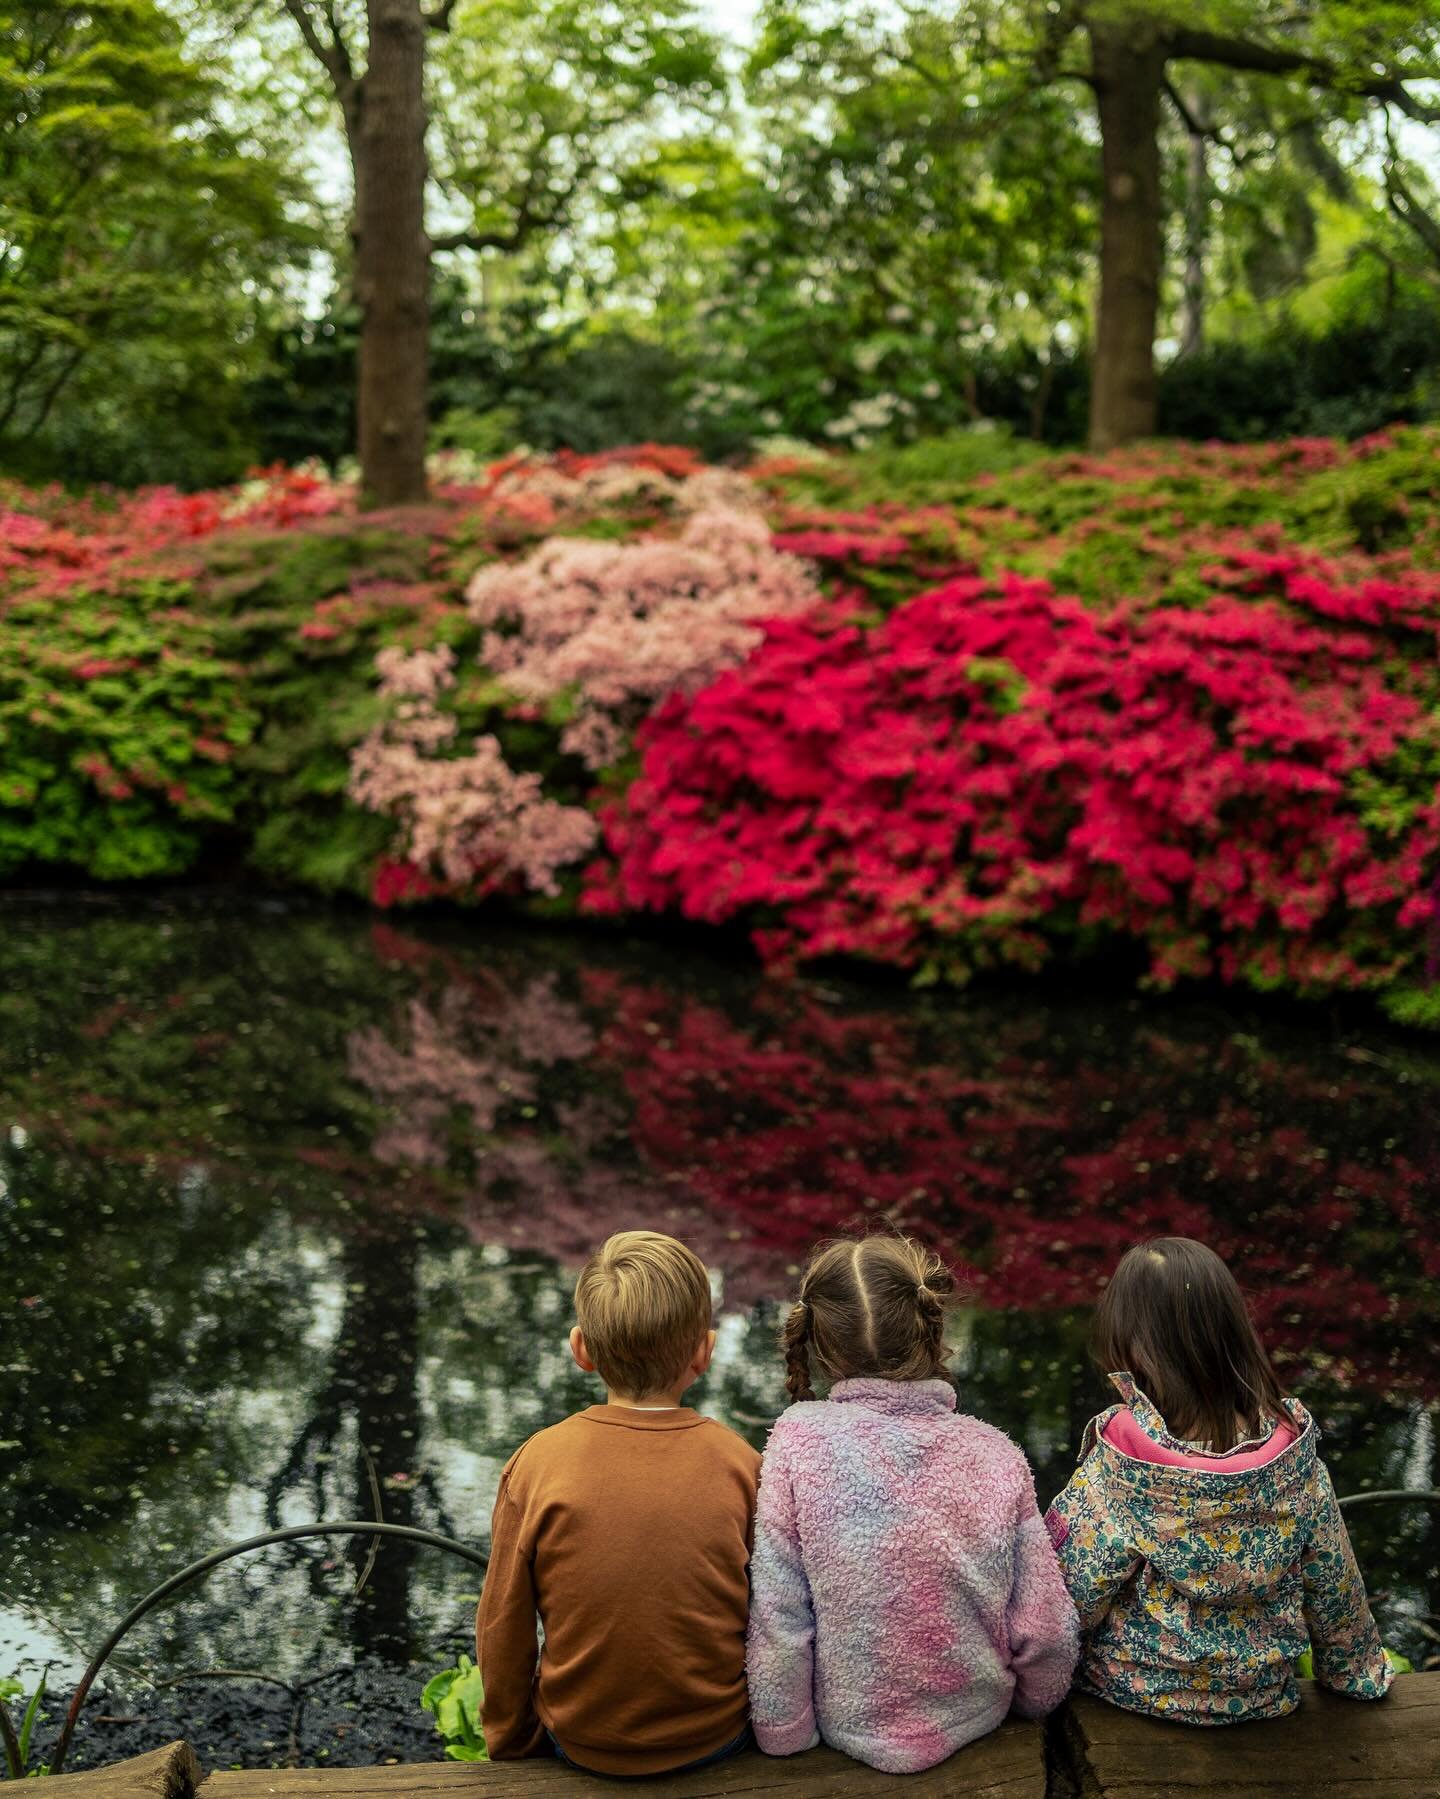 Inside Richmond Park, you will find Isabella Plantation, a woodland garden, which looks absolutely beautiful when the azaleas are in full bloom.
These were taken last year in May, but I believe now it is a good time to visit as they are blooming earl